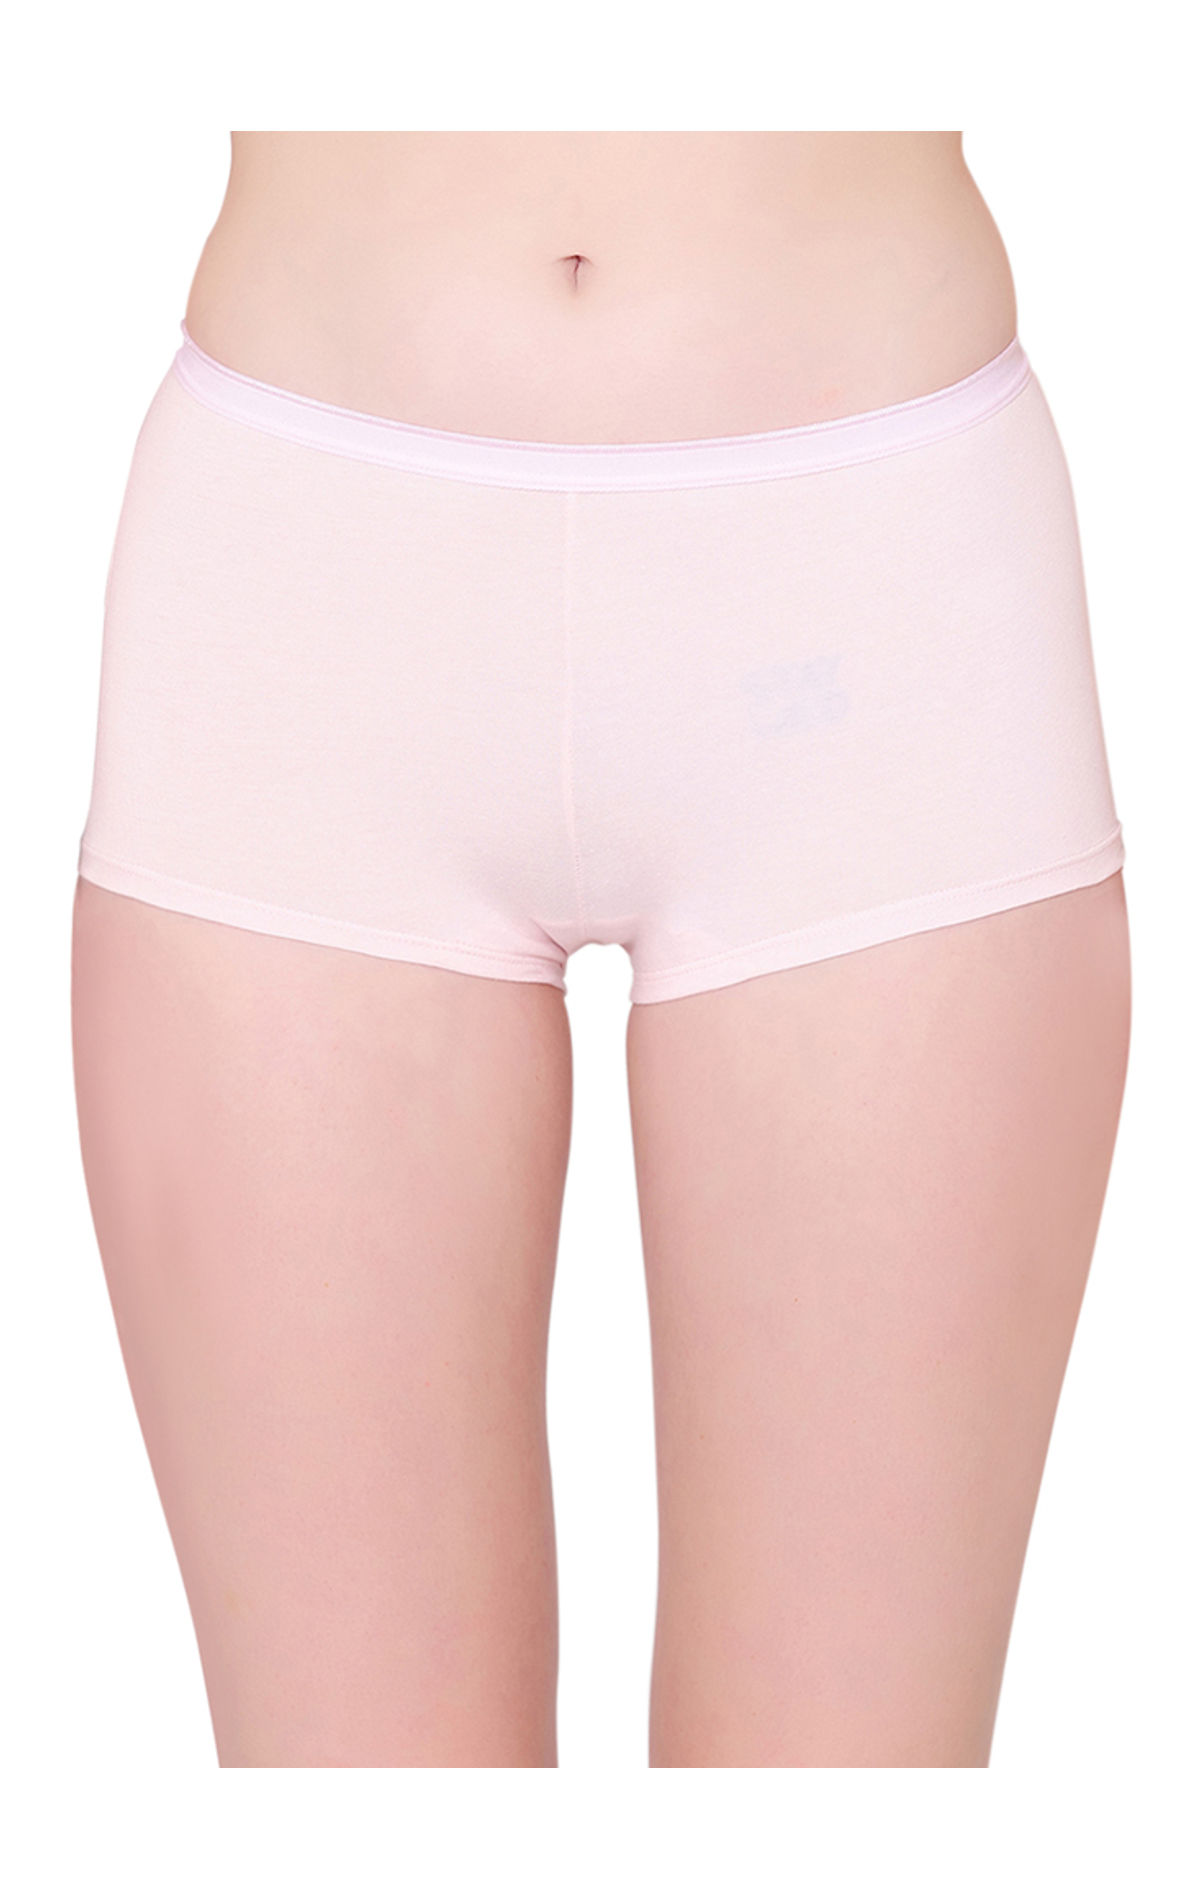 Bodycare Pack Of 3 Boyshorts In Cotton Spandex-19d, 19d